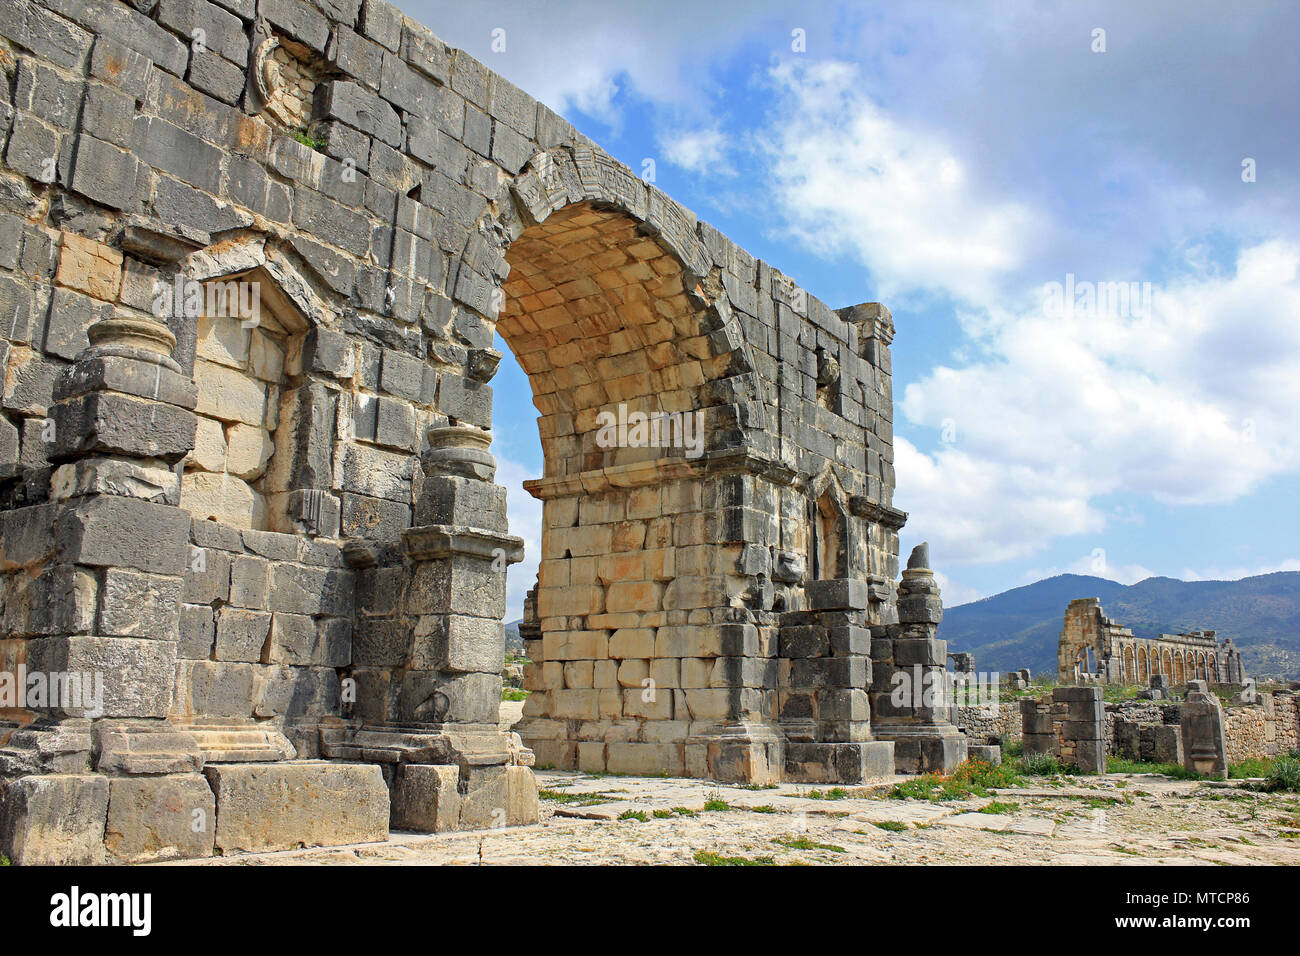 The Triumphal Arch devoted to Emperor Caracalla at the 3rd Century Ruins at Volubilis Stock Photo